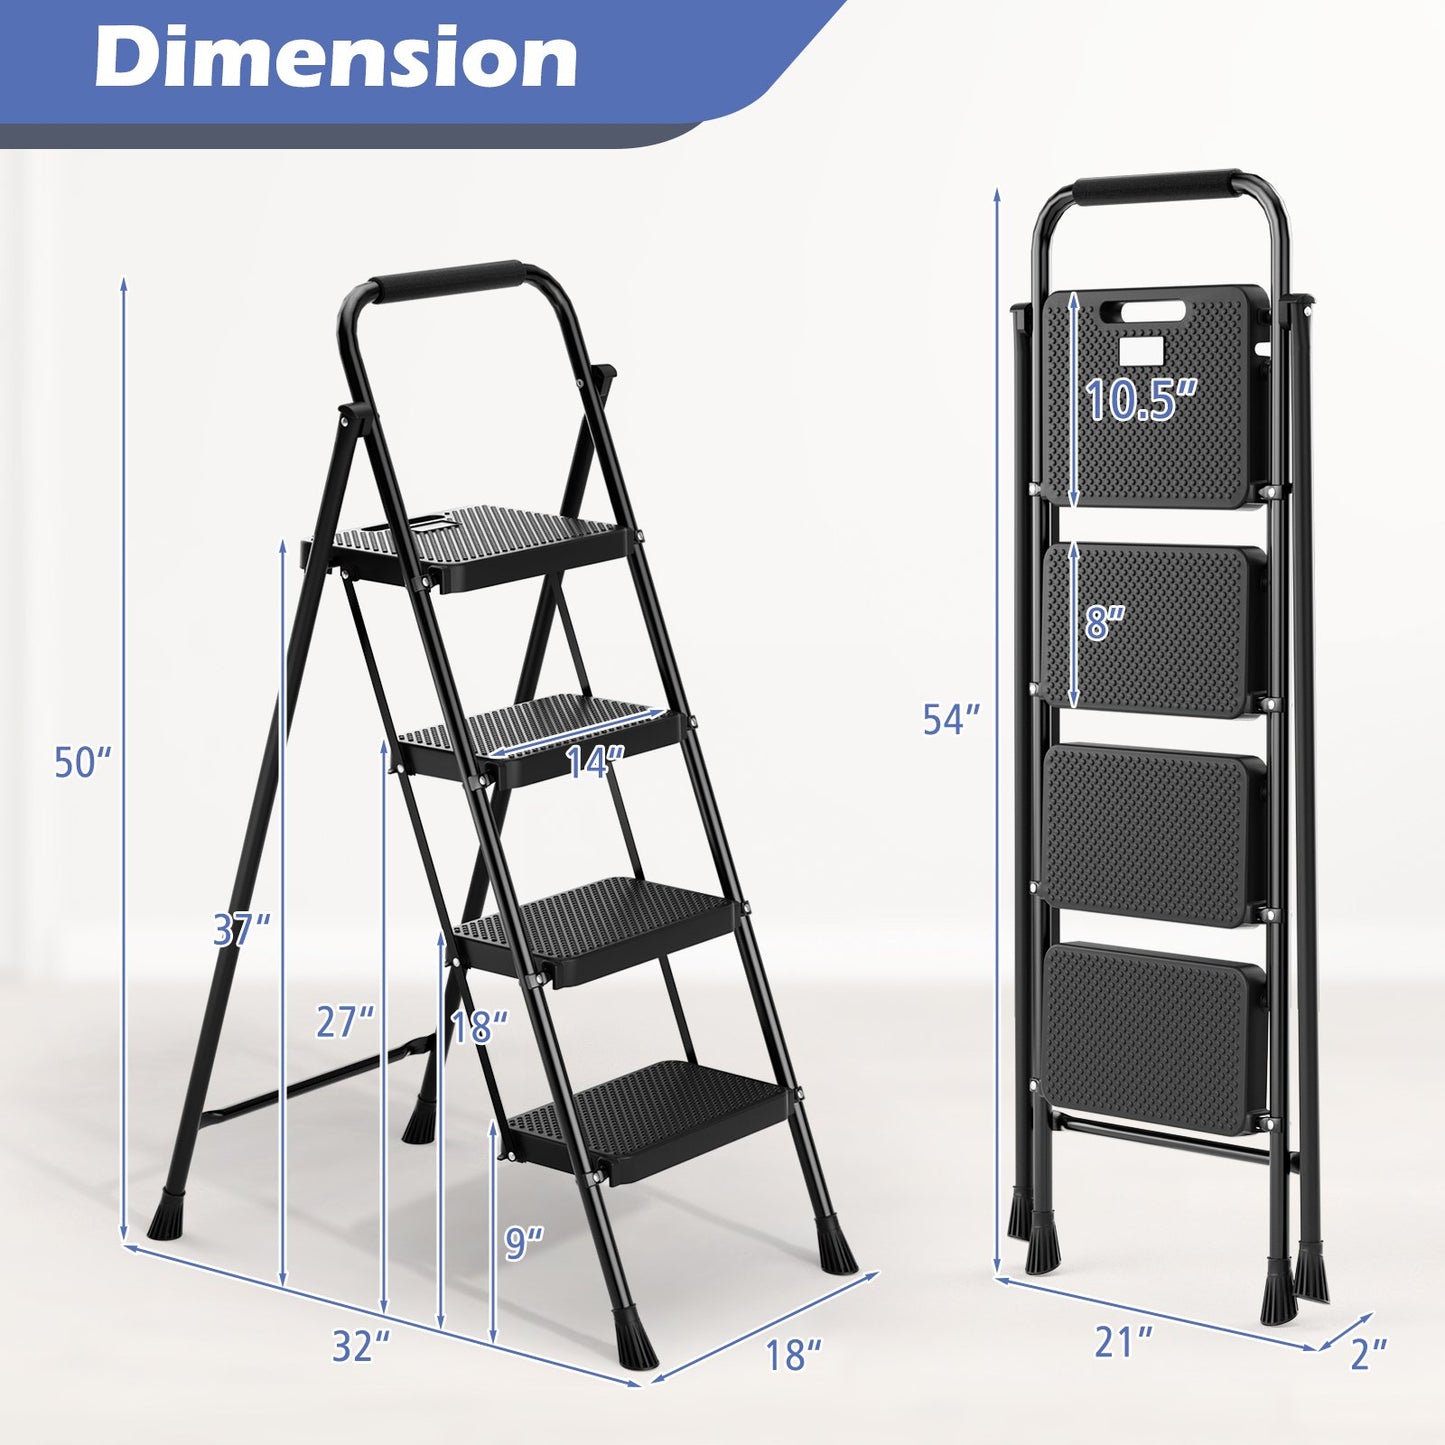 Portable Folding 4 Step Ladder Stool for Adults with Wide Anti-Slip Pedal, Black